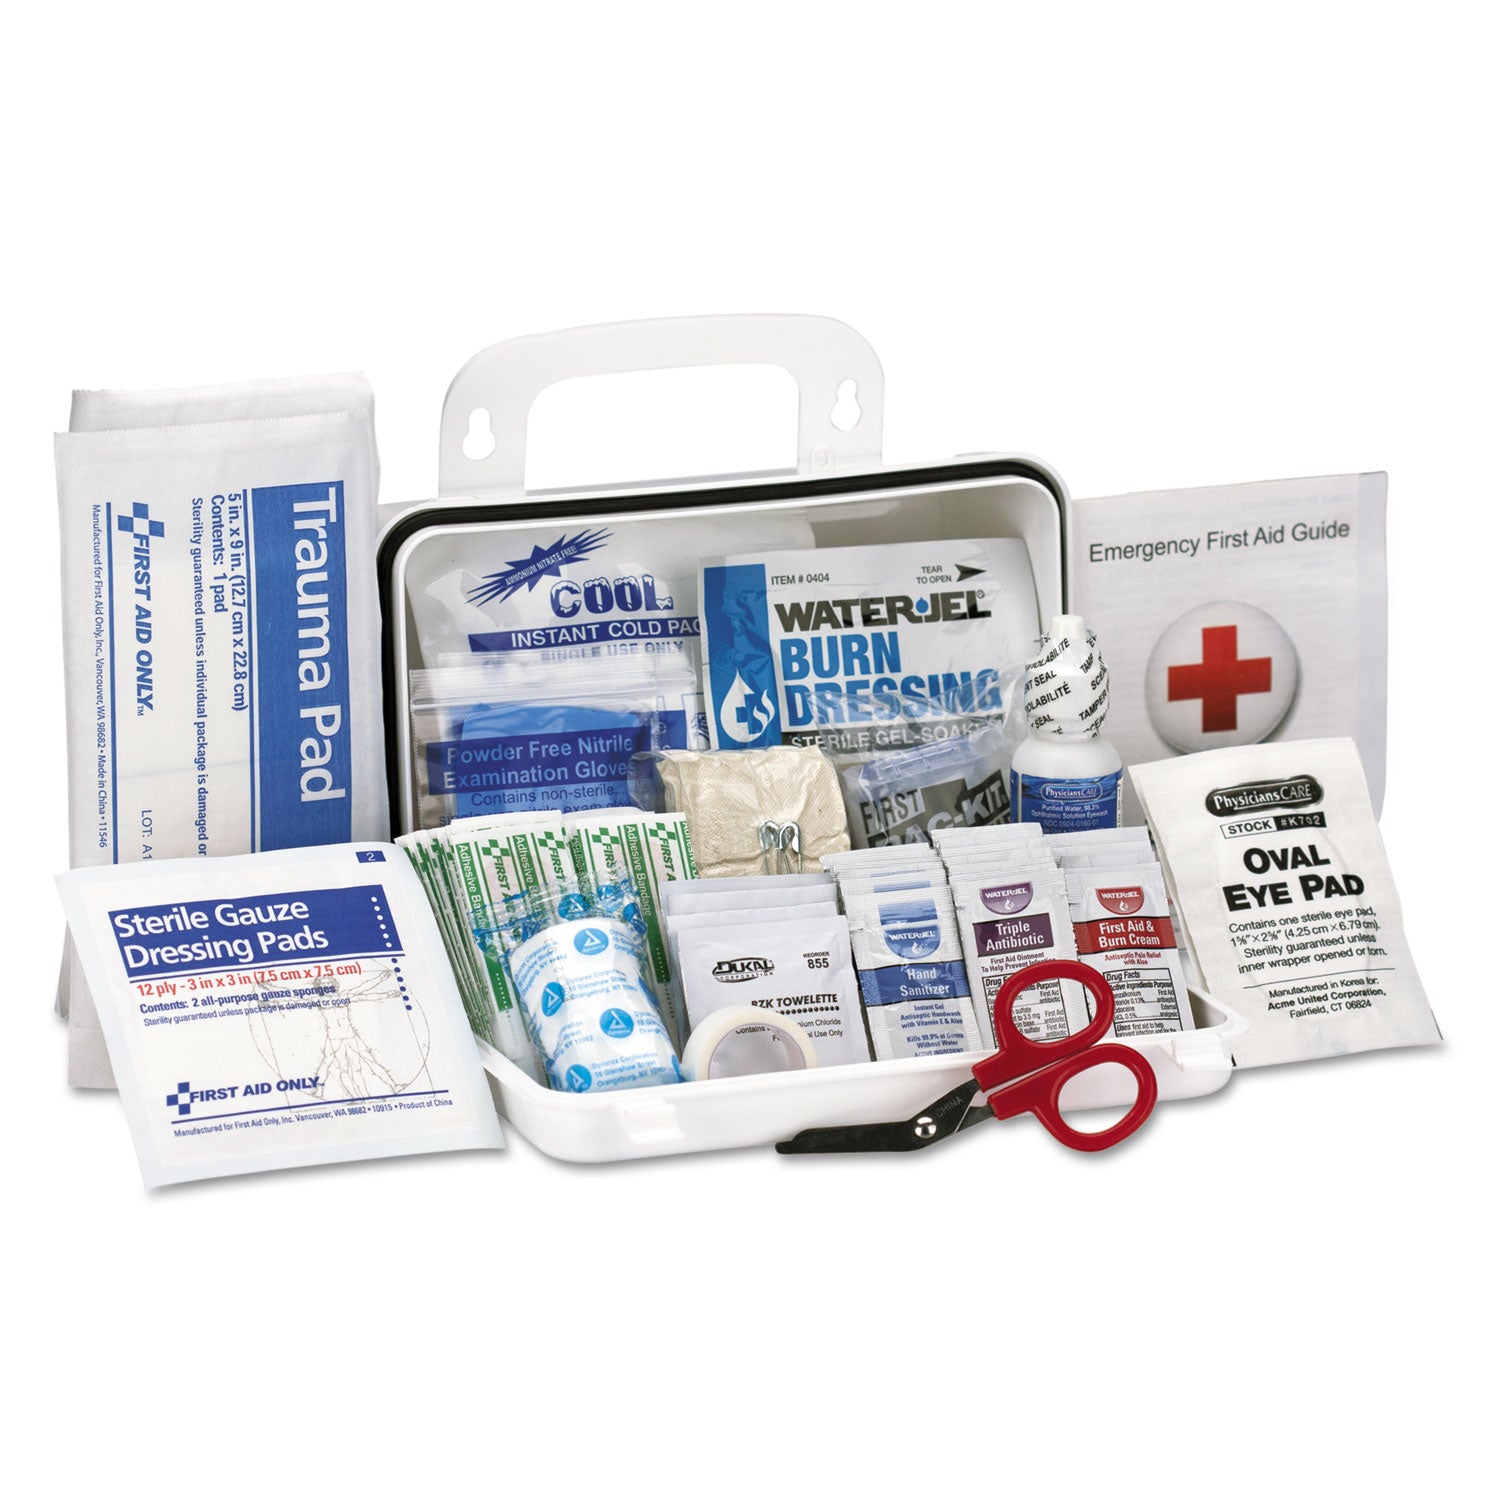 ansi-class-a-10-person-first-aid-kit-71-pieces-plastic-case_fao90754 - 2